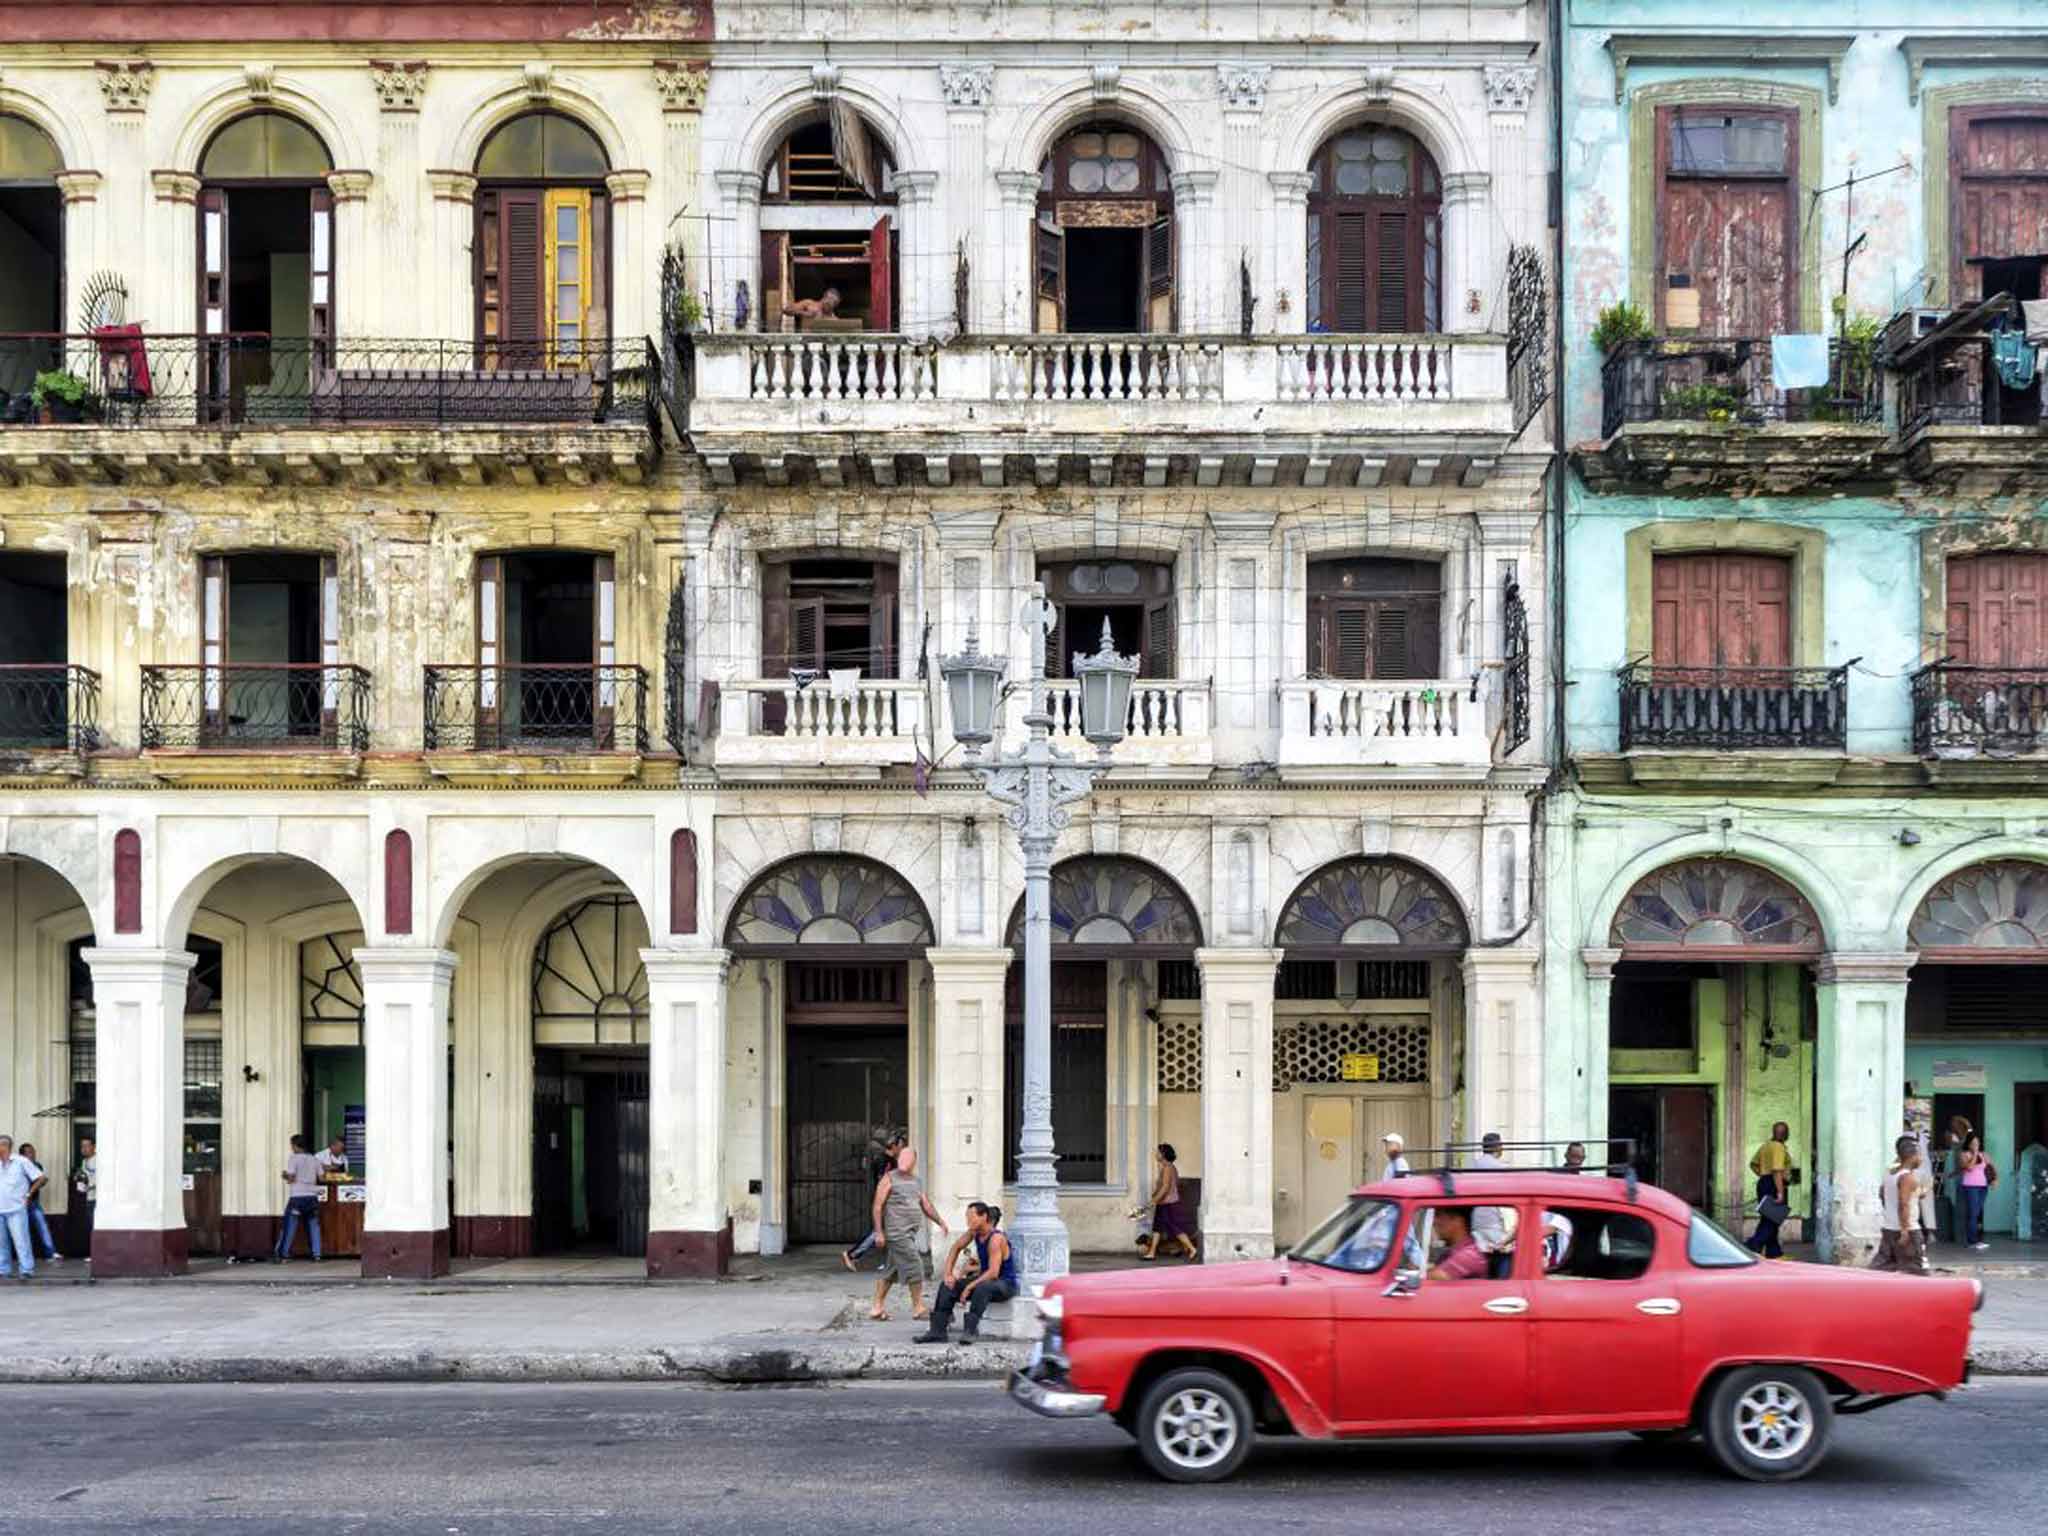 Until today, Cuba was one of only a tiny handful of nations beyond the Air BnB's reach along with Iran and North Korea.